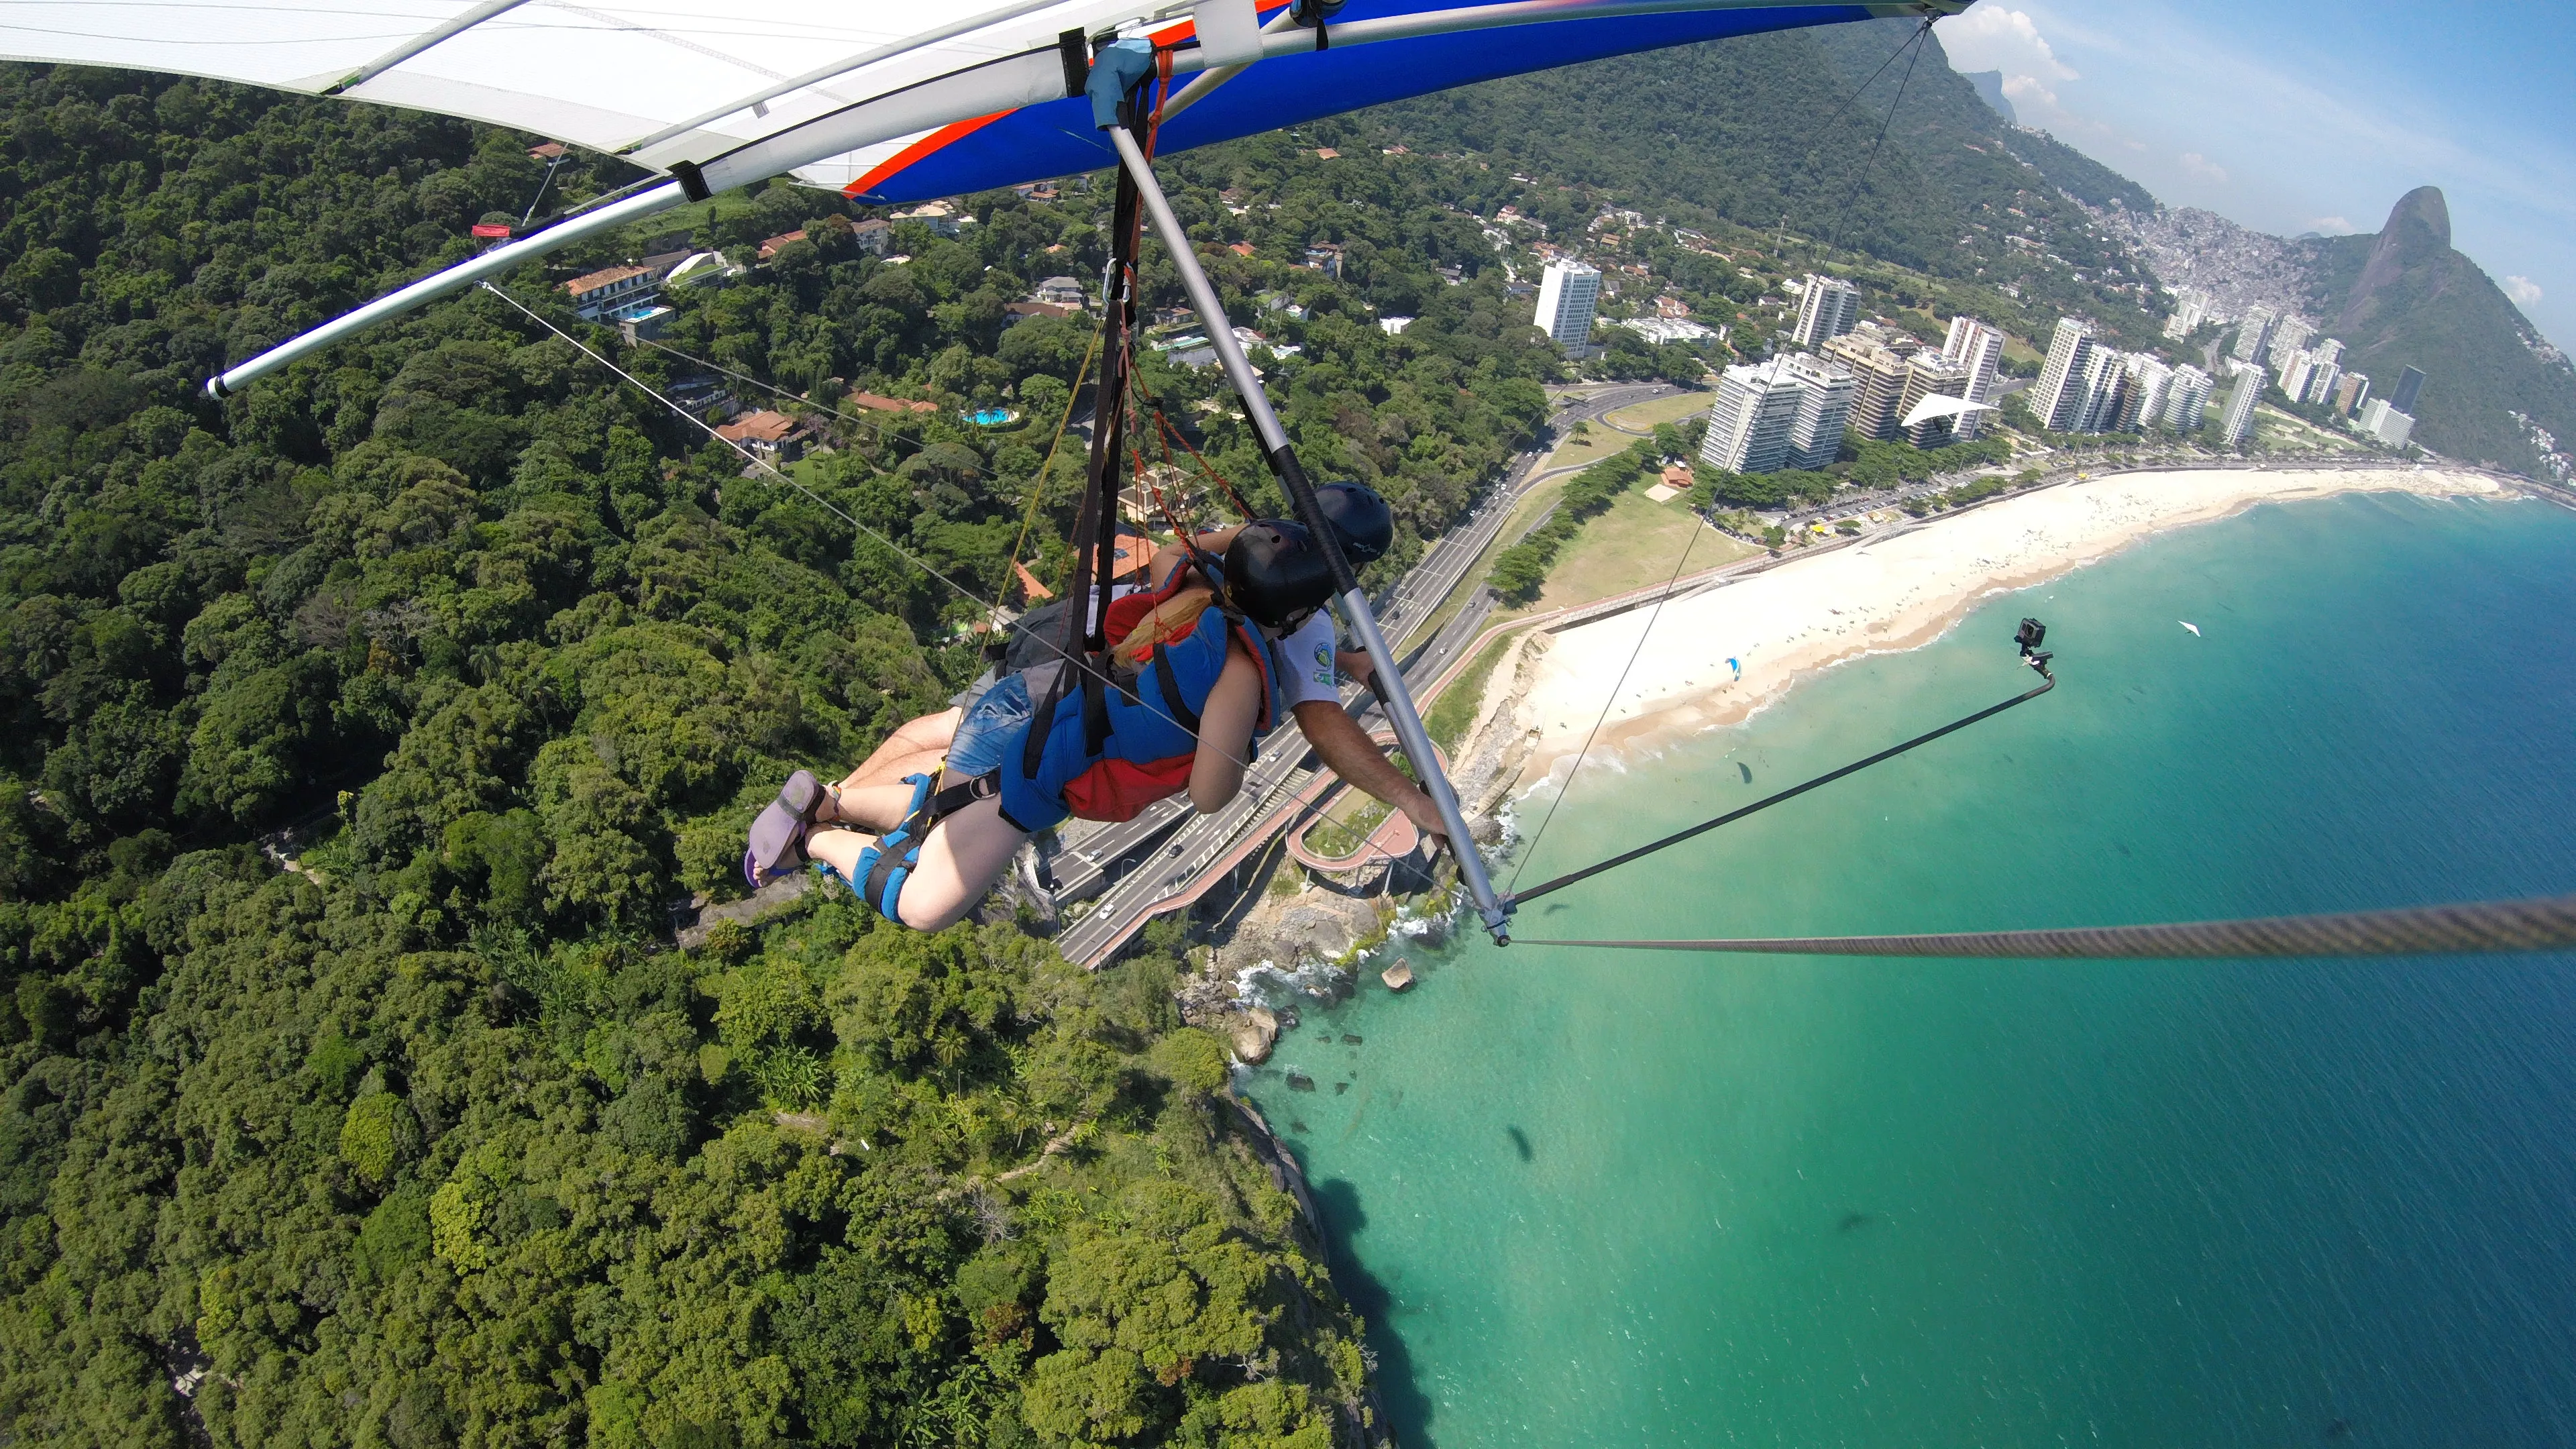 Best Fly River Free Flight in Brazil, South America | Hang Gliding - Rated 3.9